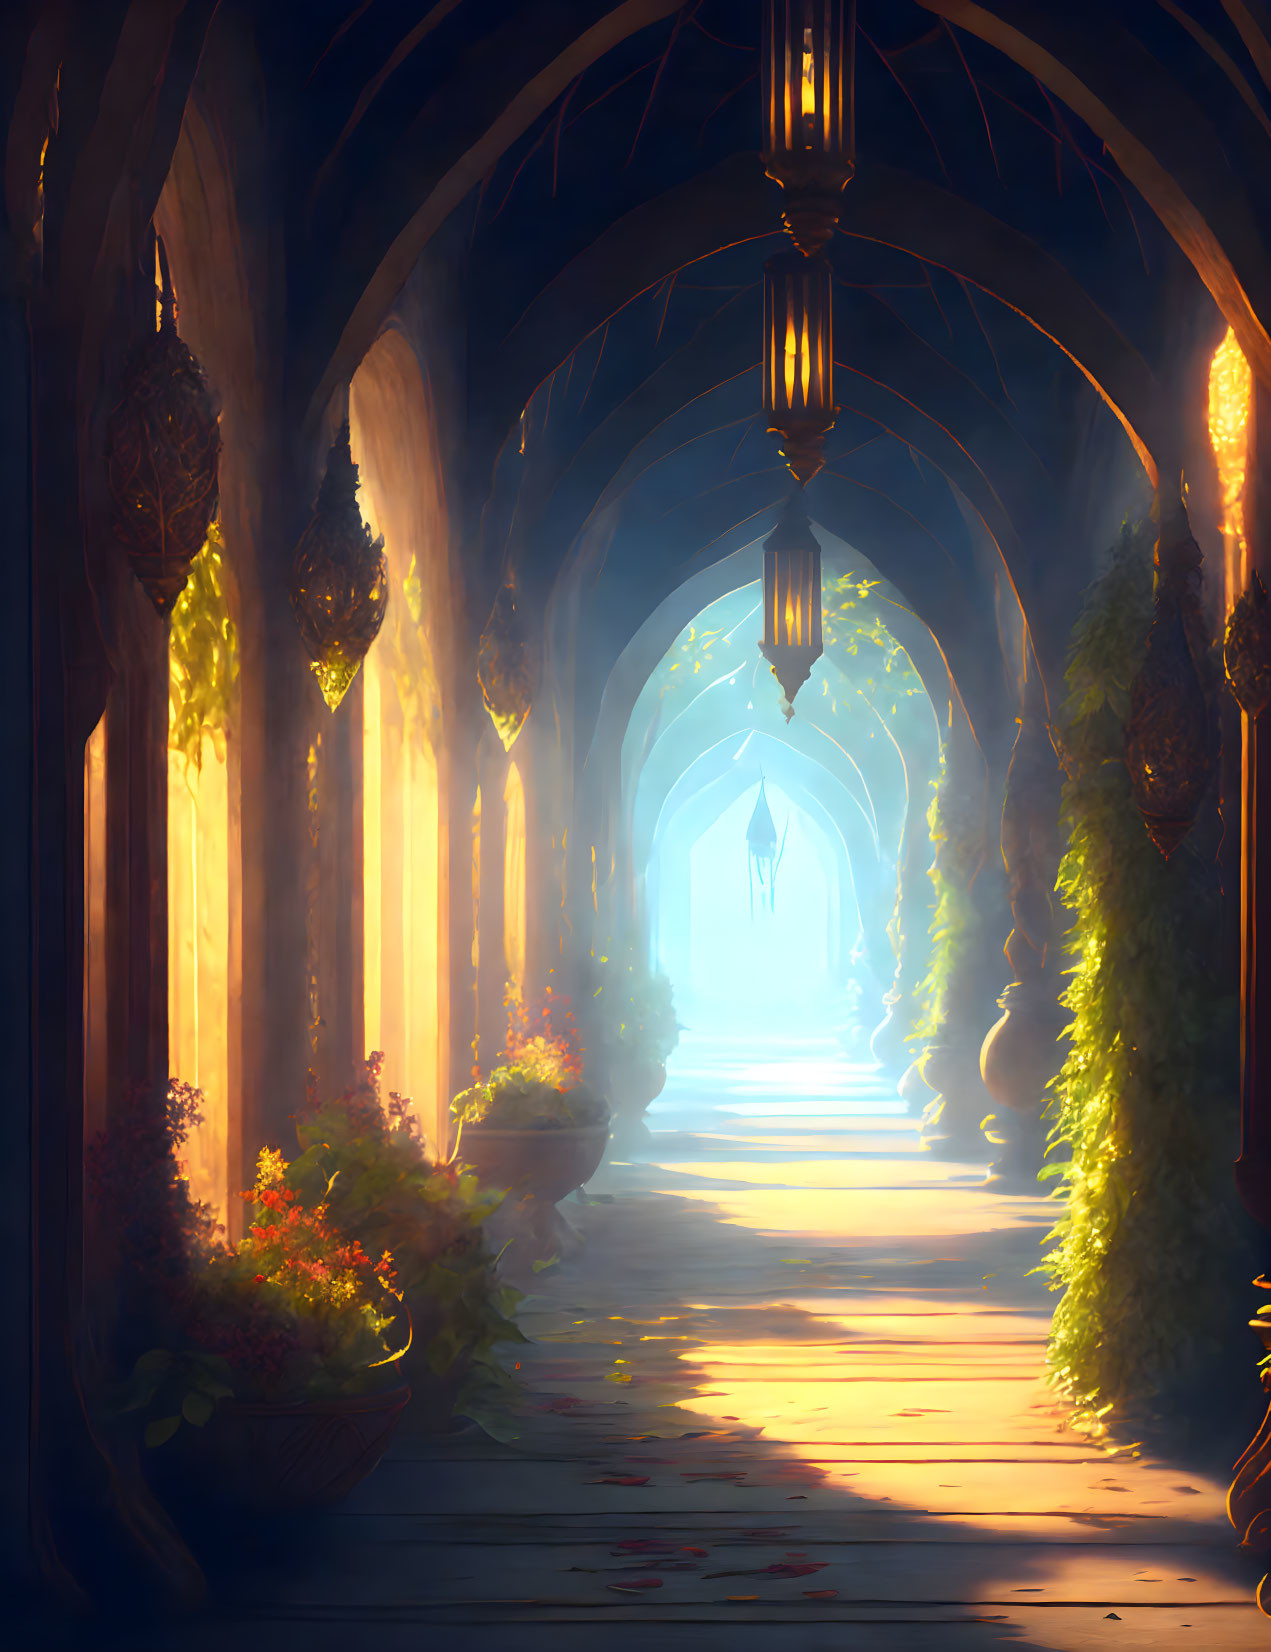 The elven path